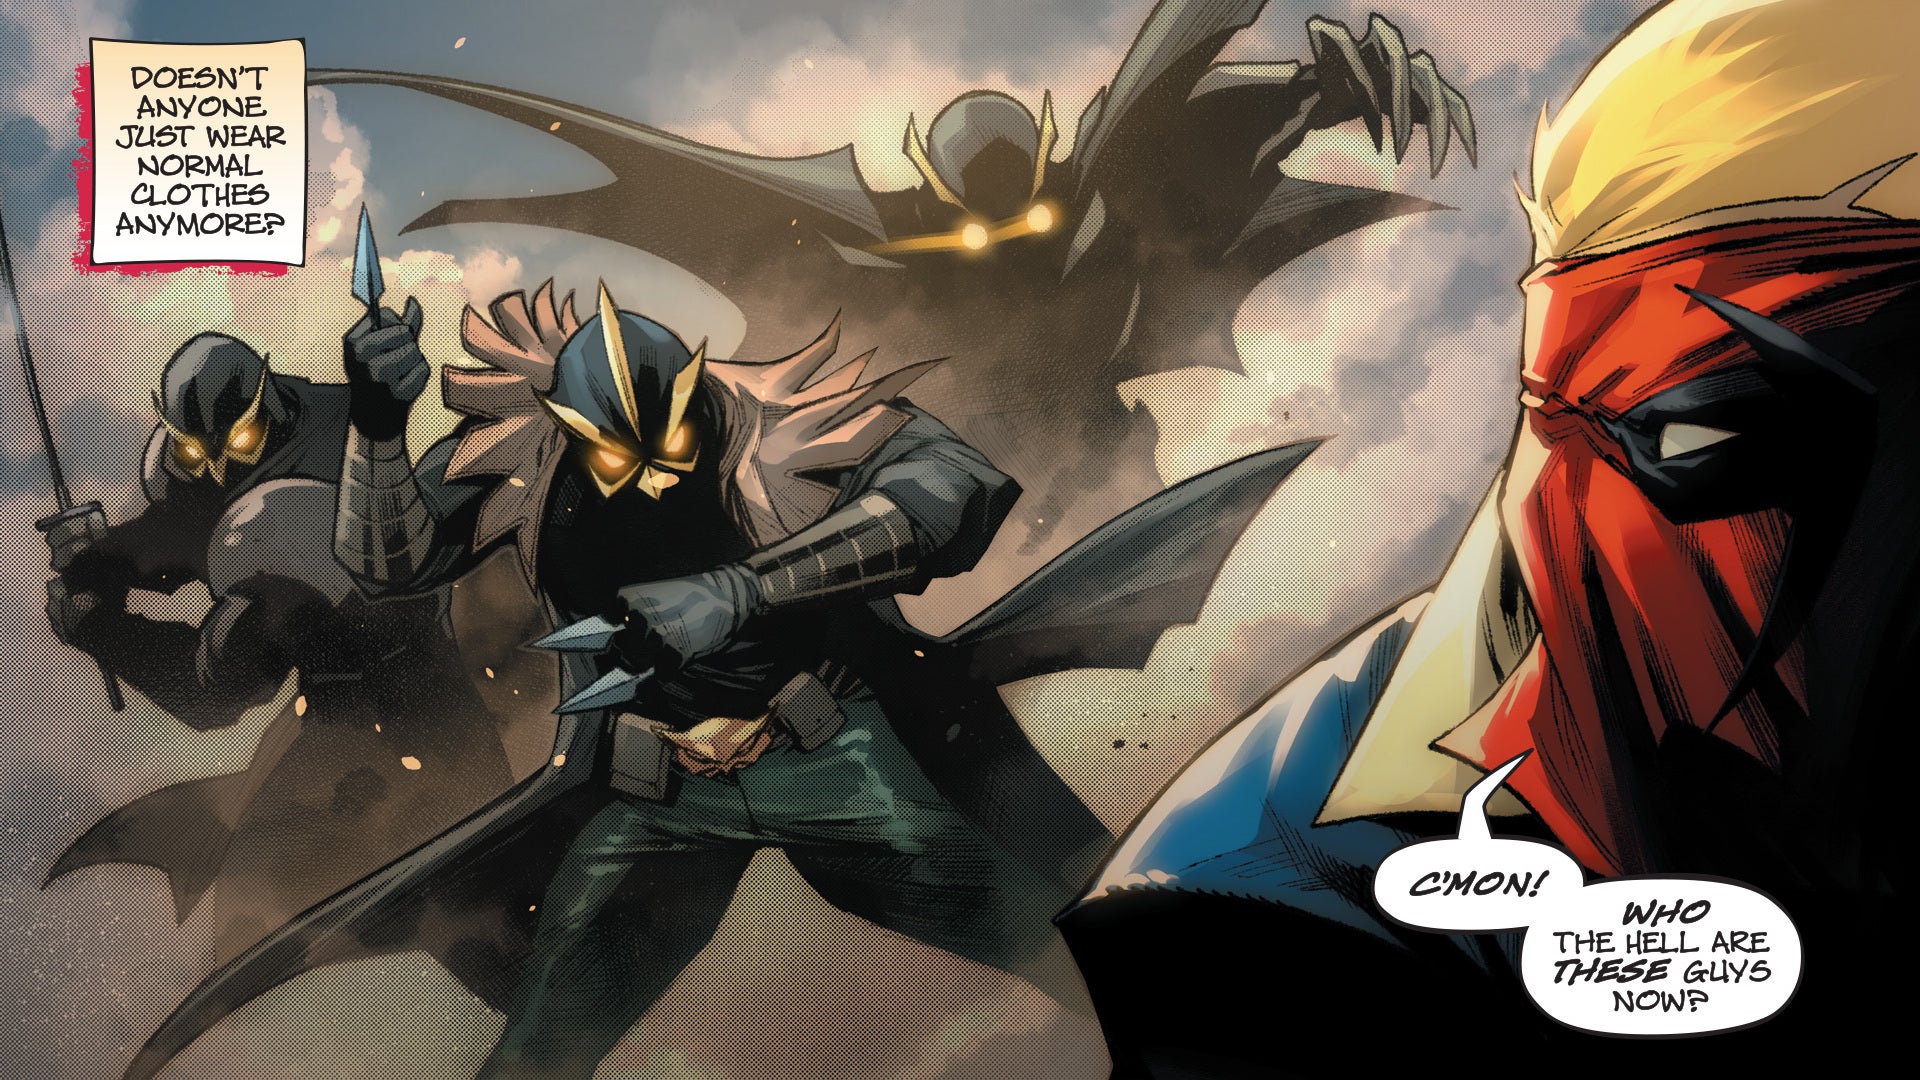 The Court of Owls attack Grifter